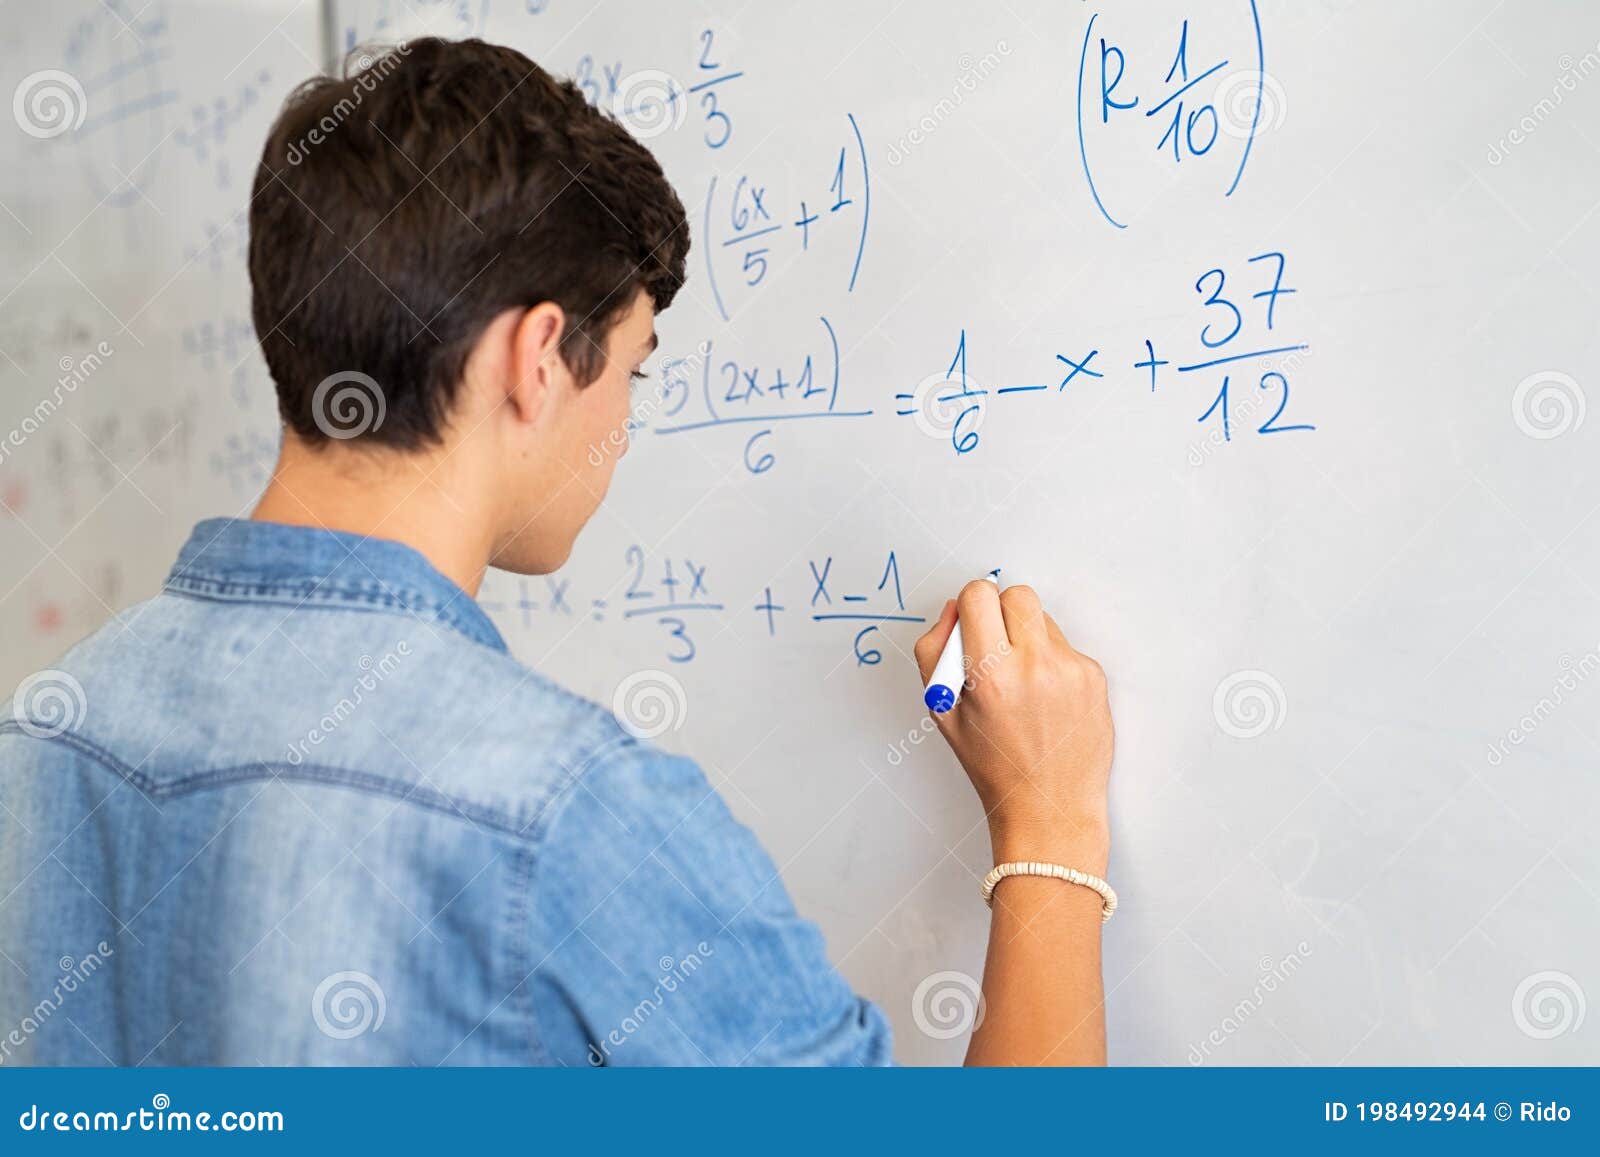 college student solving math equation on white board